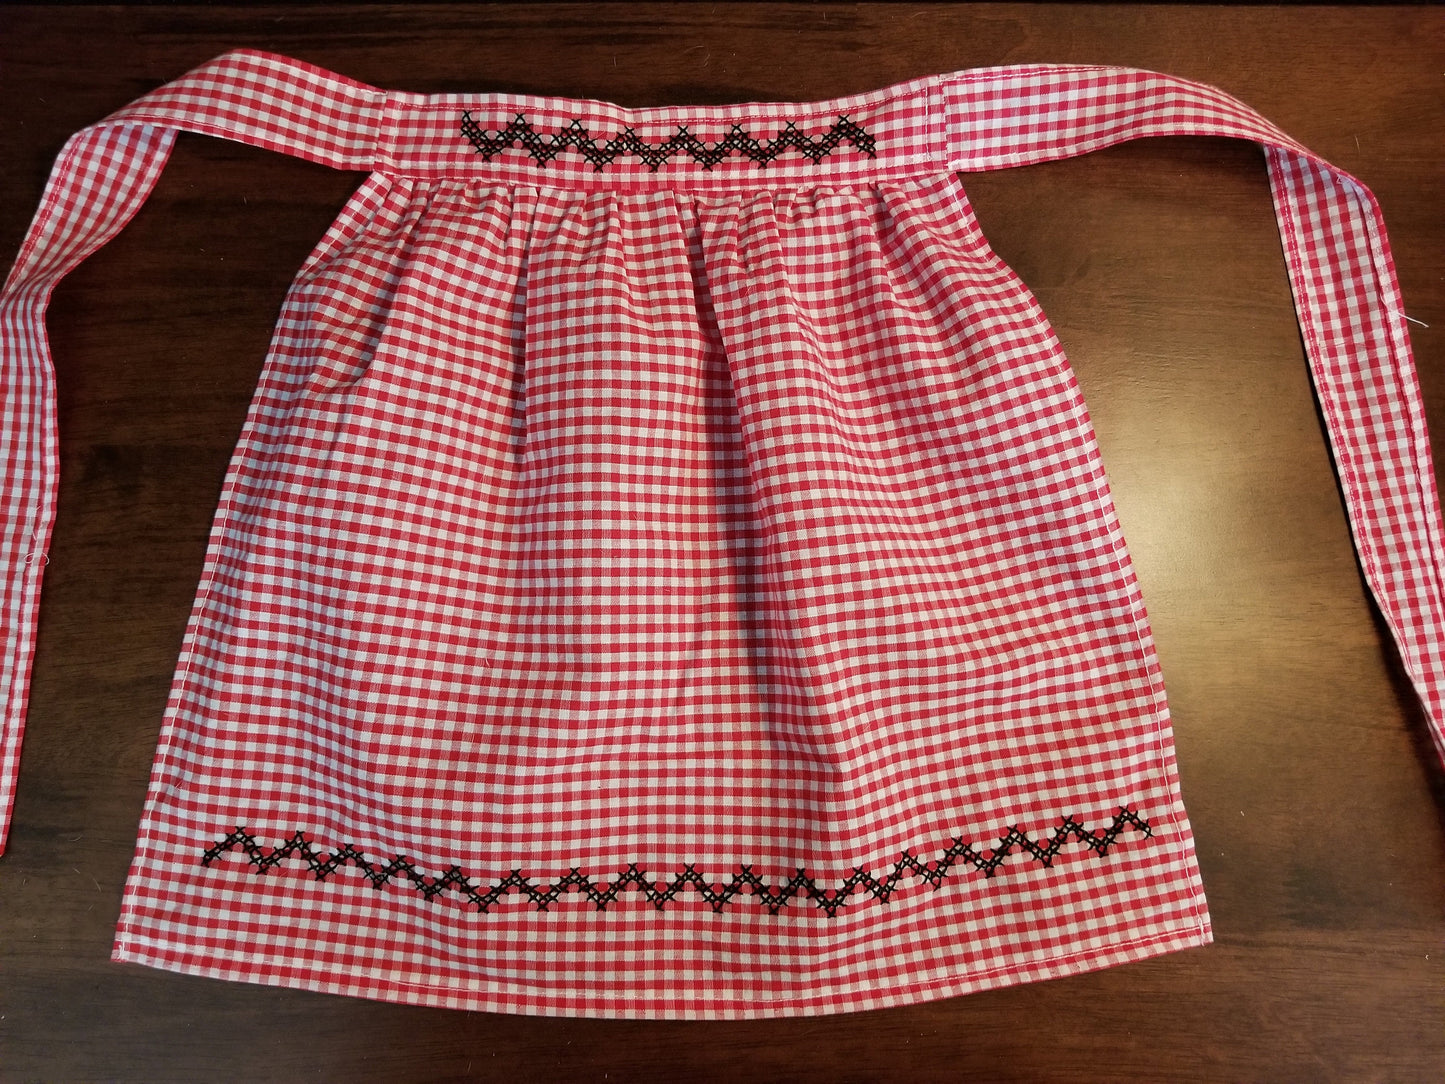 Red Gingham Child's Apron with Black Cross Stitch Accents